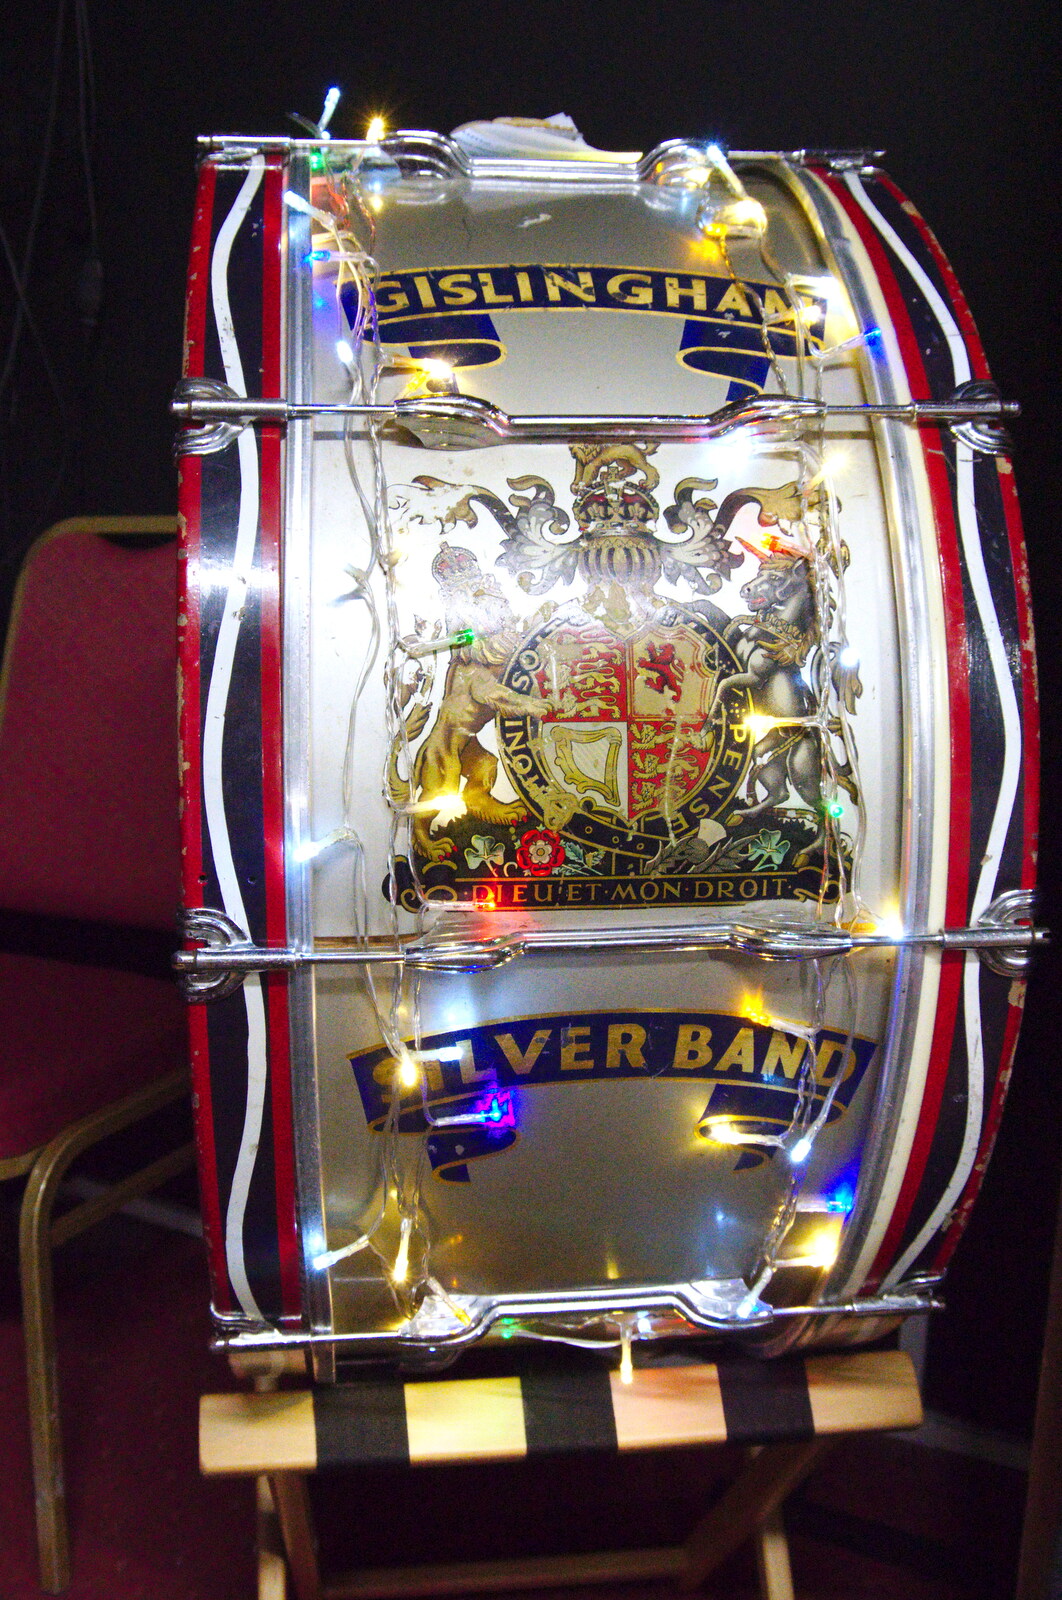 Terry's done the bass drum up with fairy lights from GSB Concerts and the BSCC Christmas Dinner, Suffolk - 13th December 2019